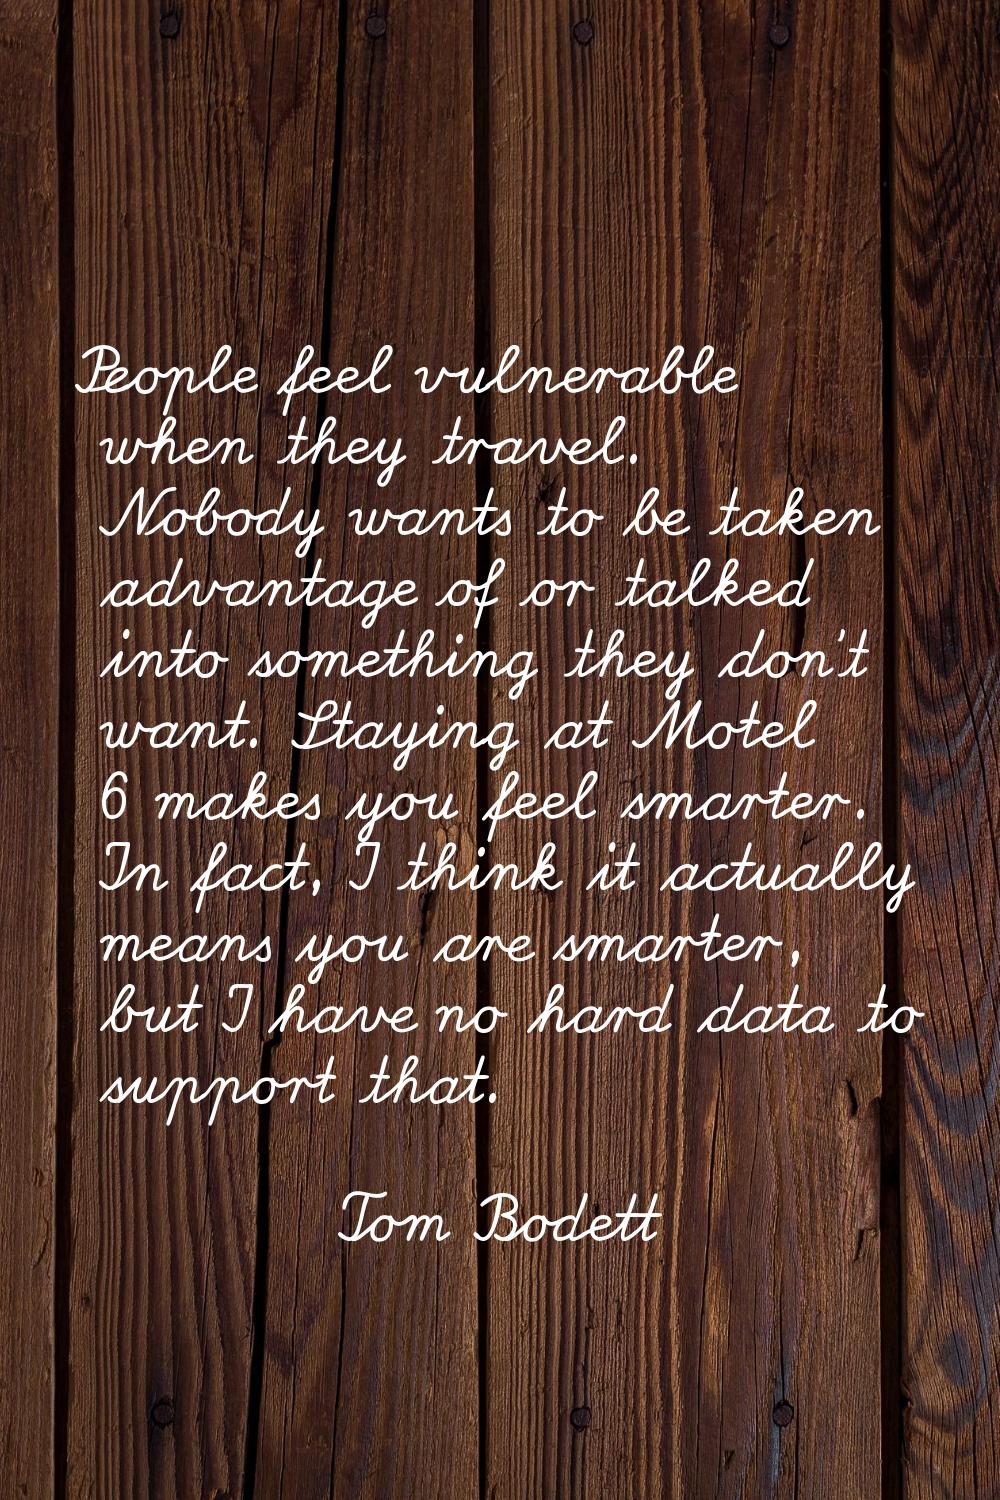 People feel vulnerable when they travel. Nobody wants to be taken advantage of or talked into somet